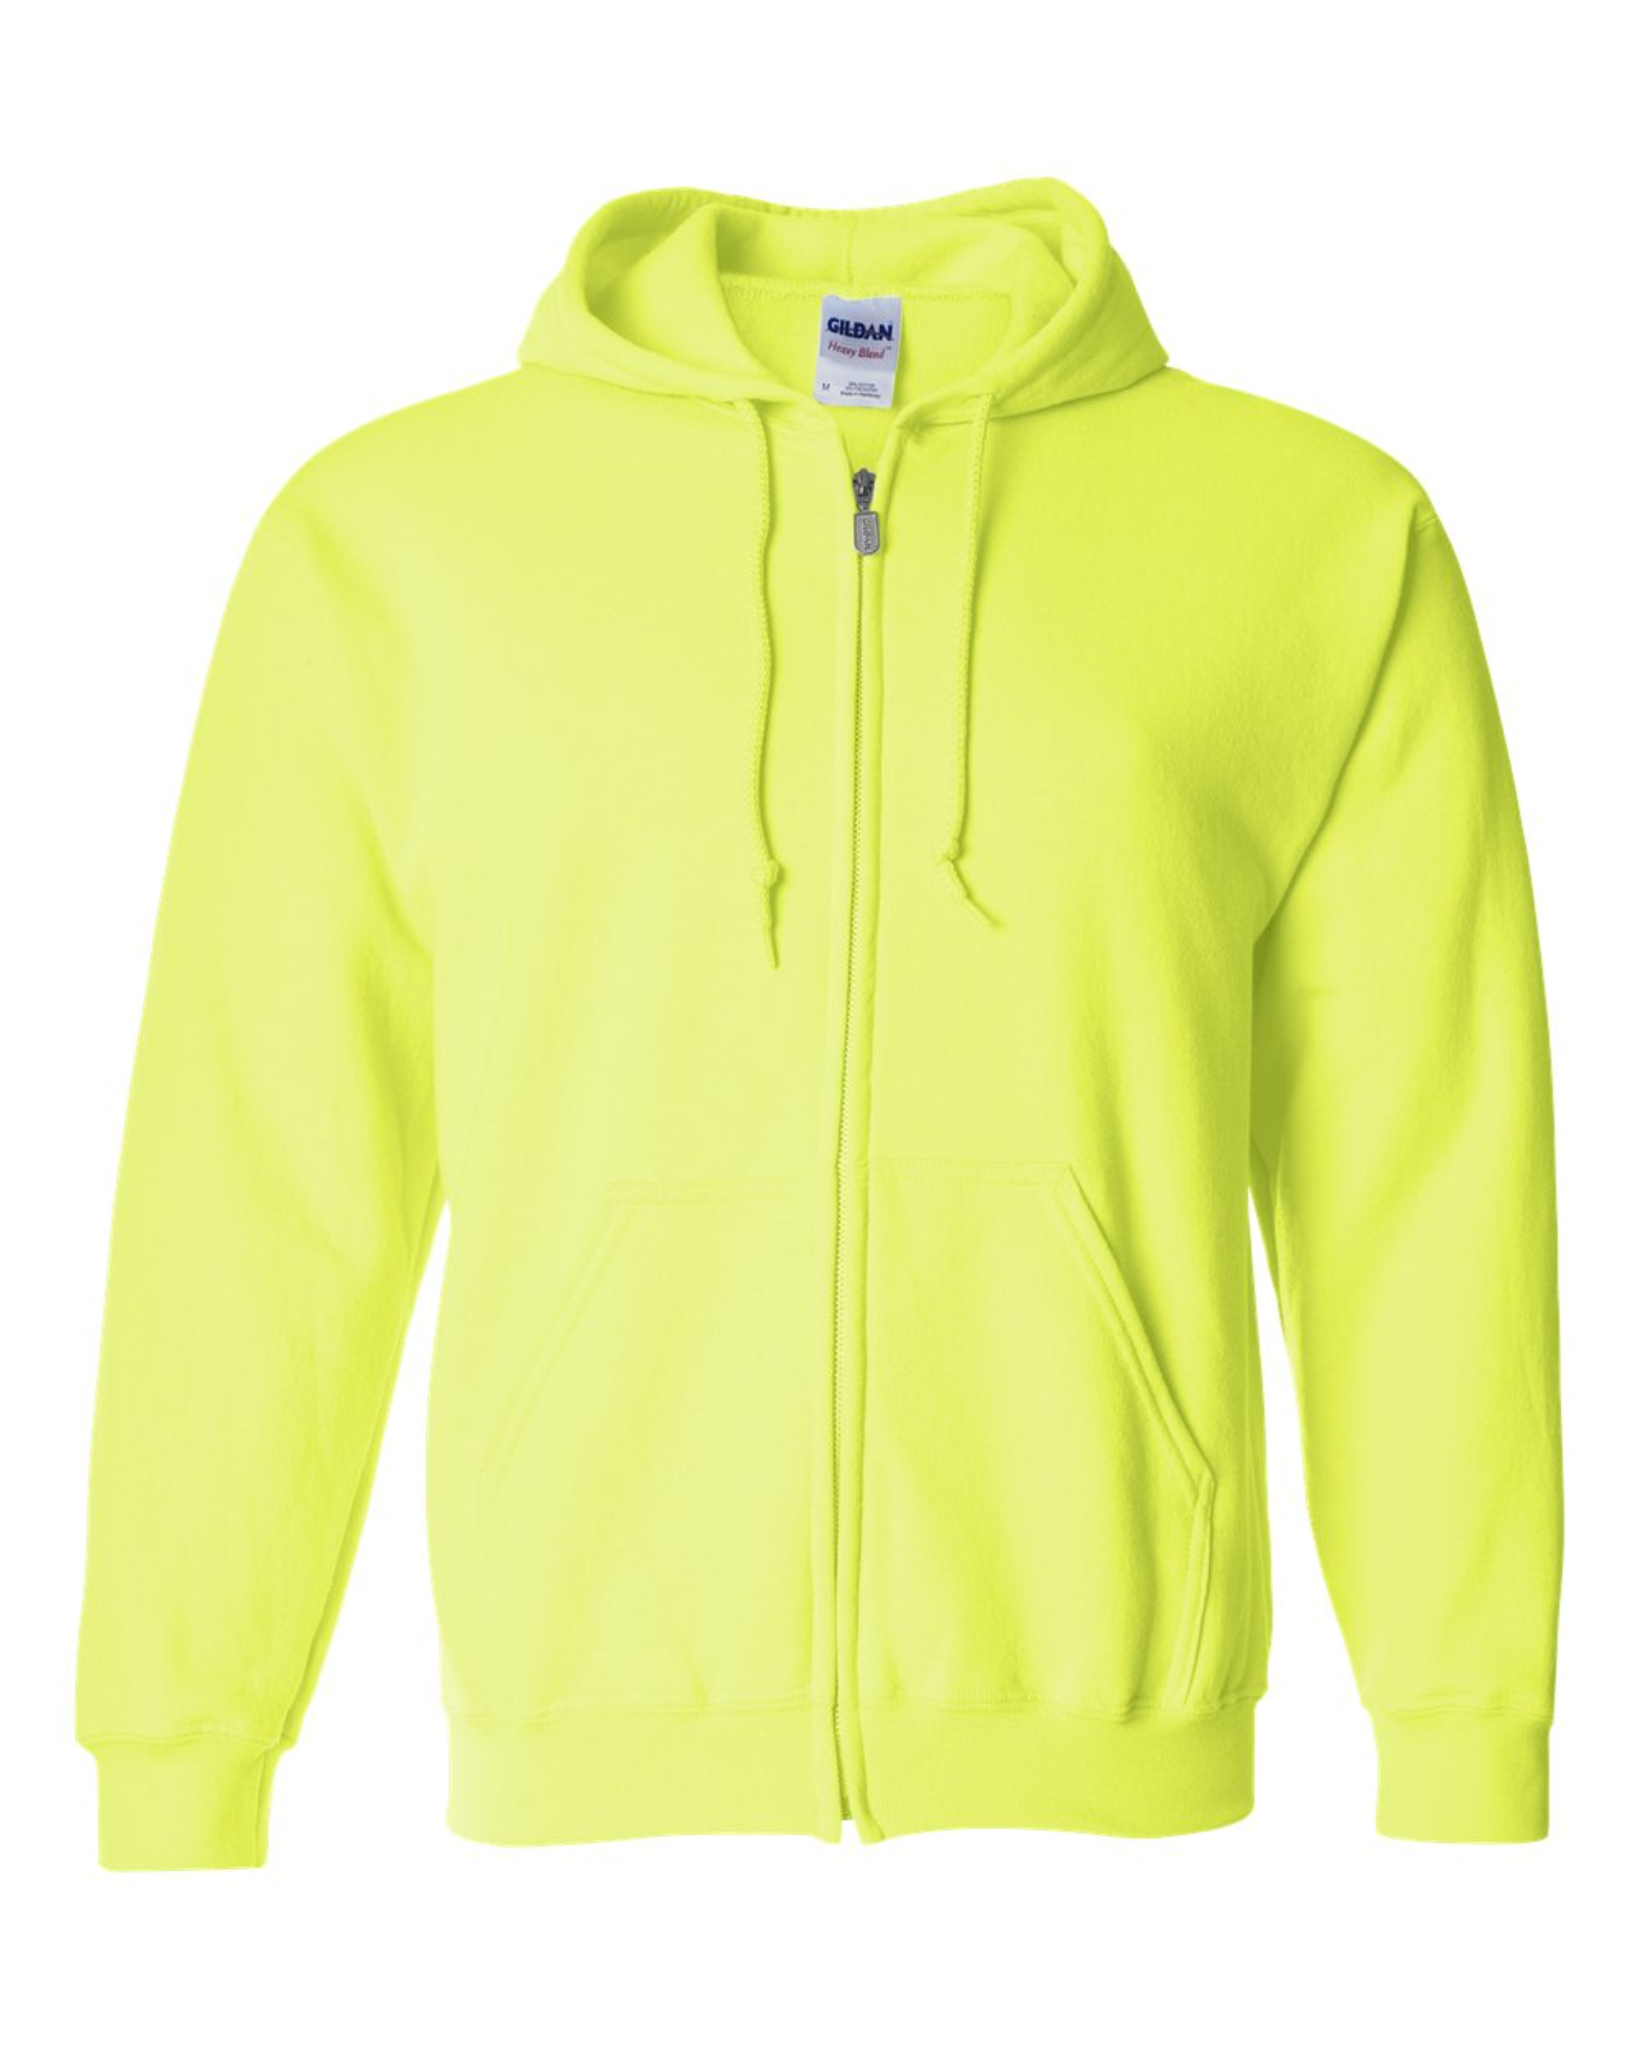 Adult Full-Zip Hoodie - Safety Green Cotton/Polyester - Gildan 18600